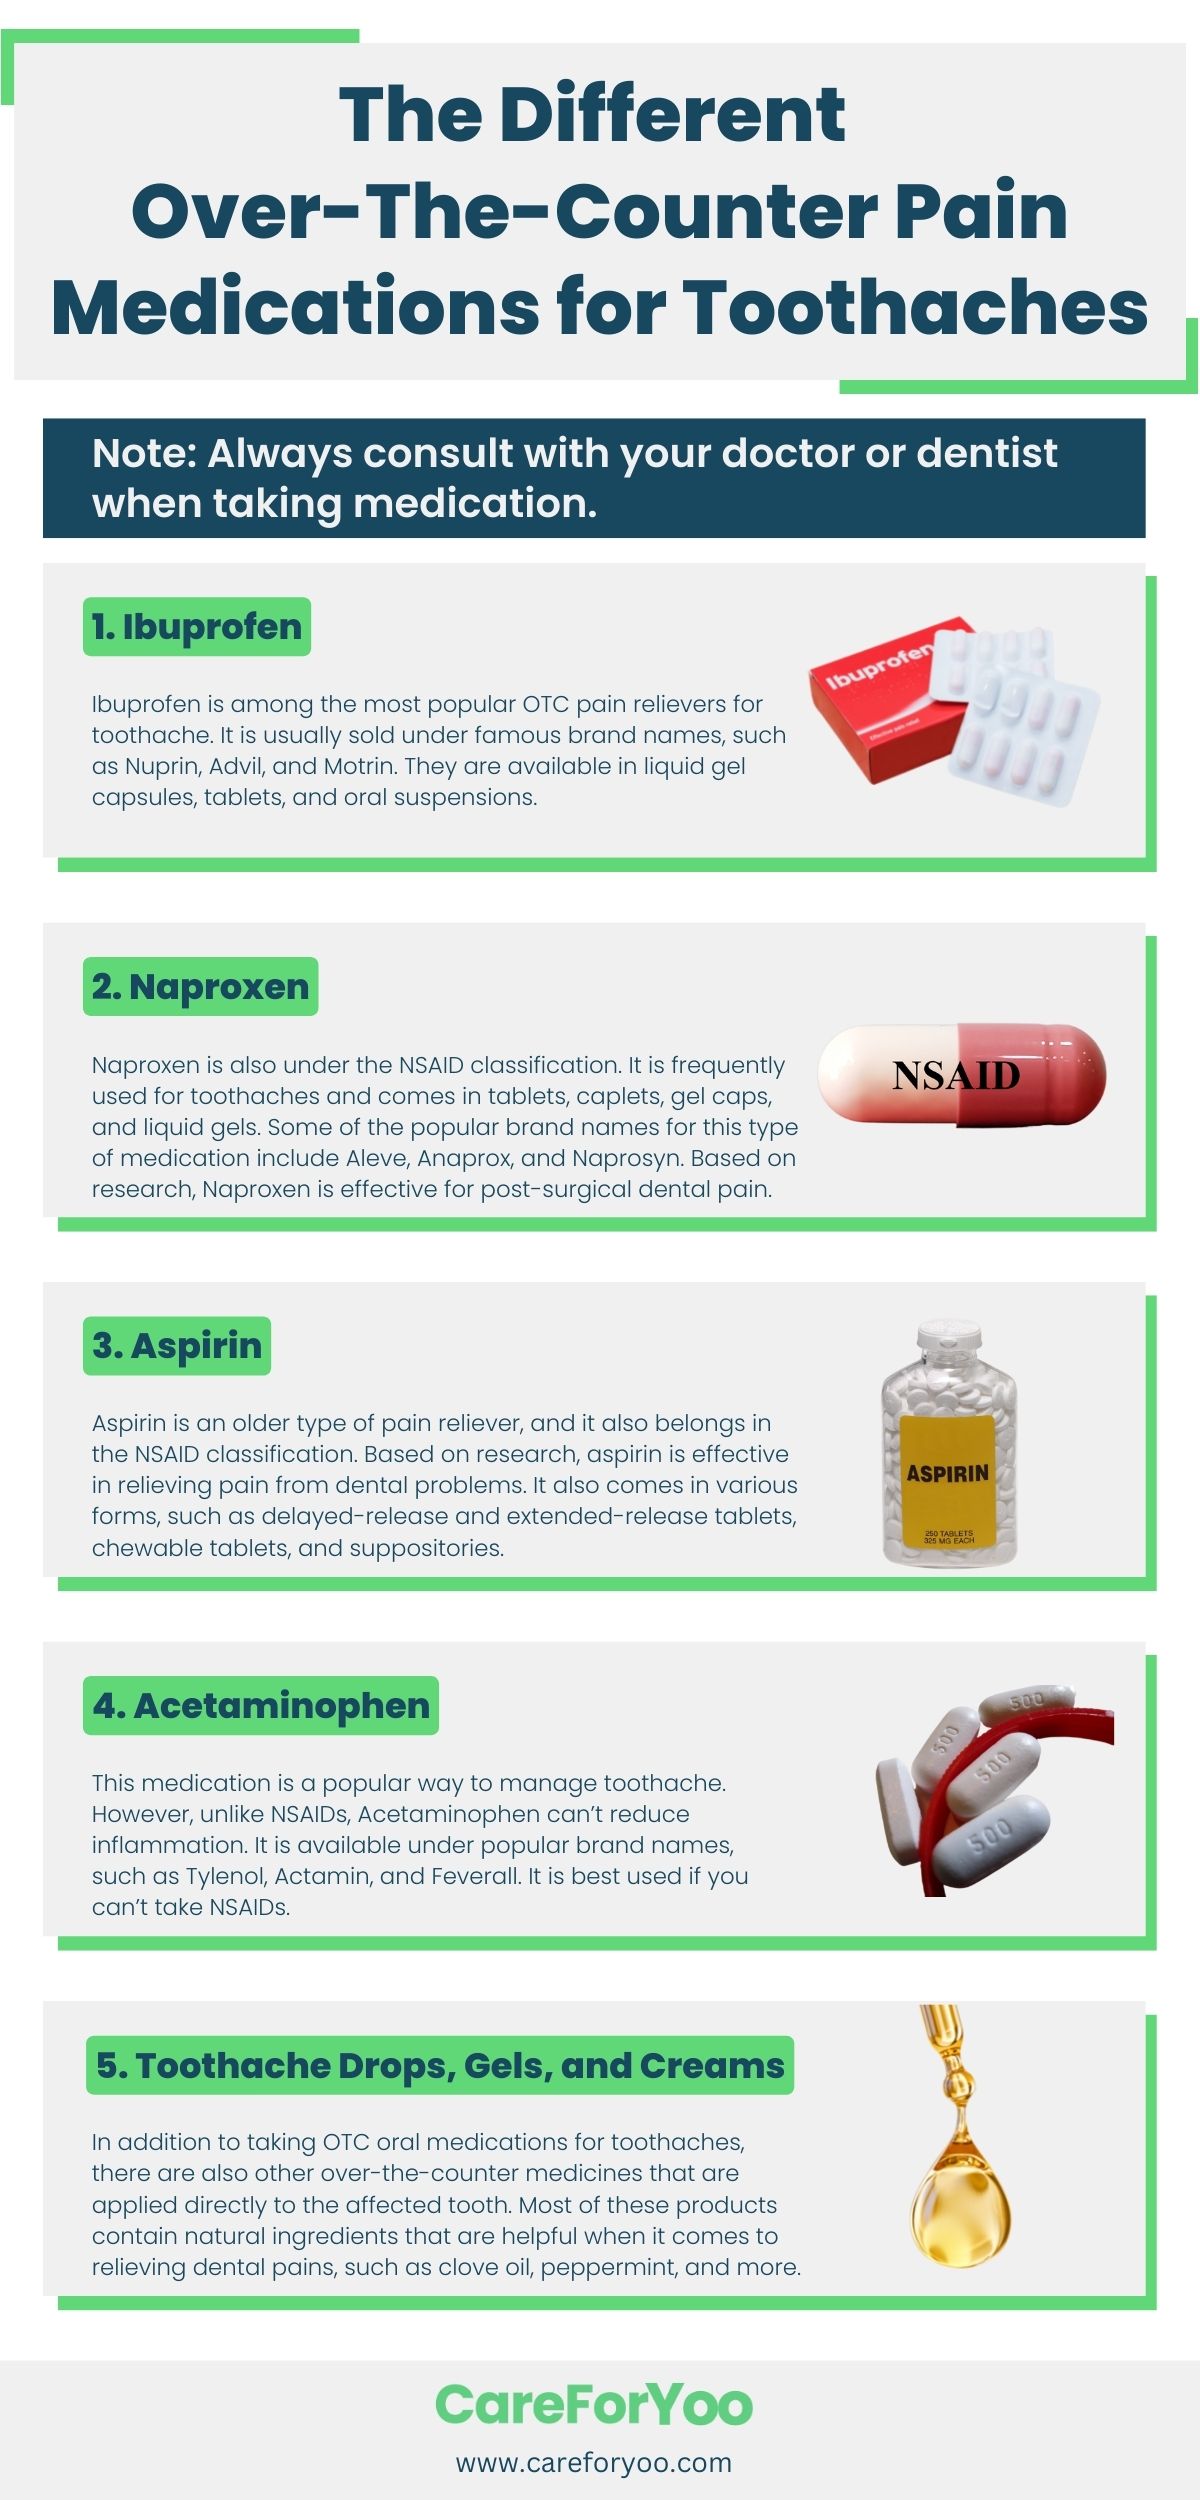 The-Different-Over-The-Counter-Pain-Medications-for-Toothaches